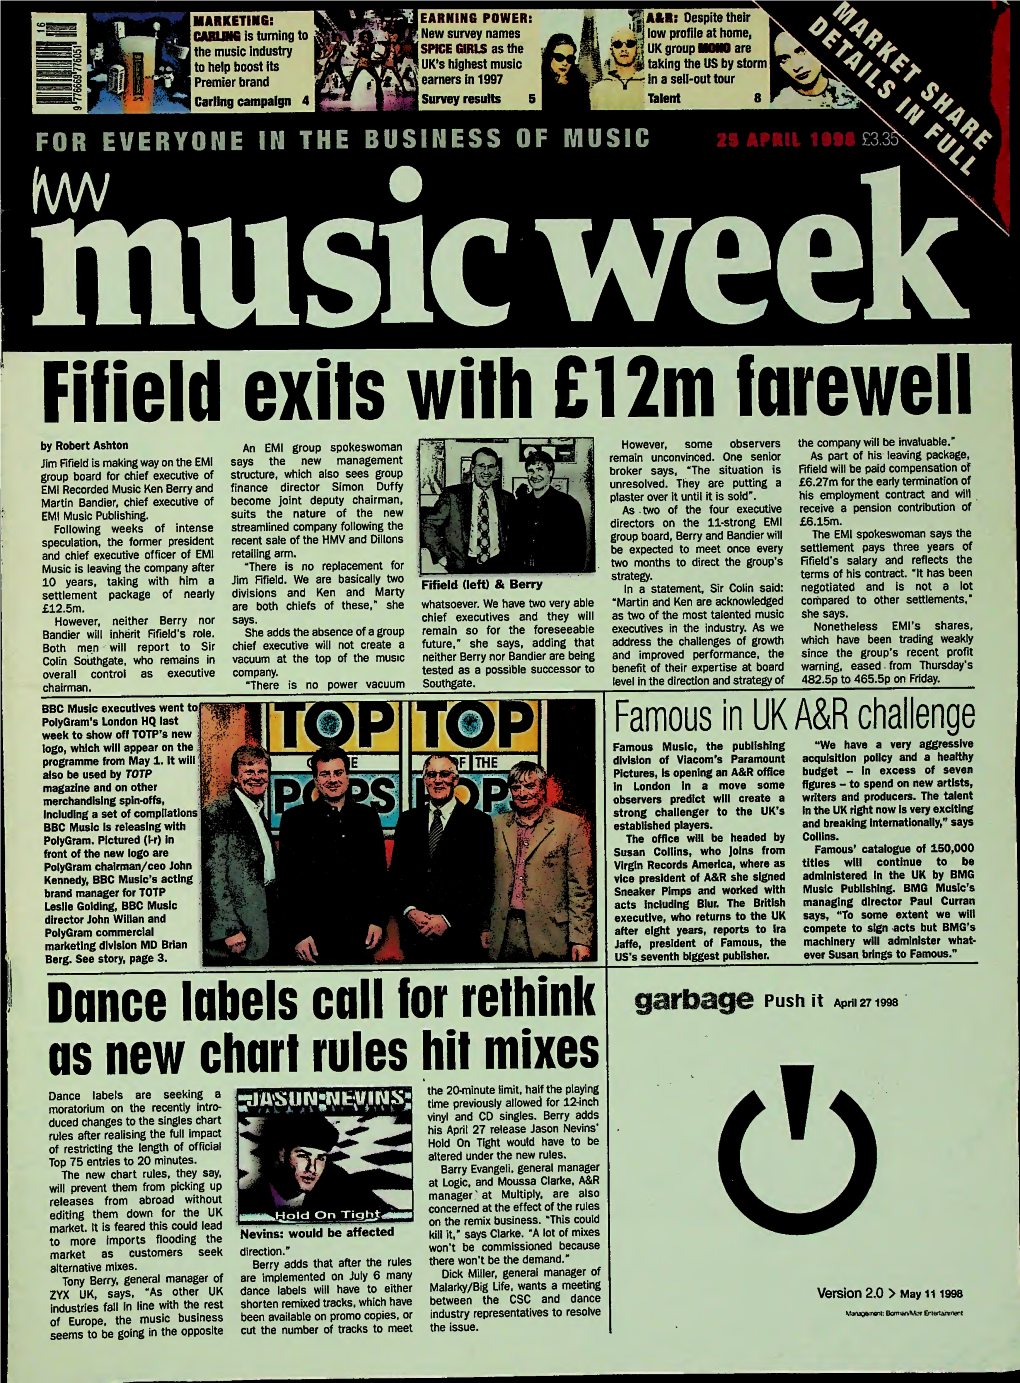 Fifield Exils with £12M Iorewell by Robert Ashton Jim Fifield Is